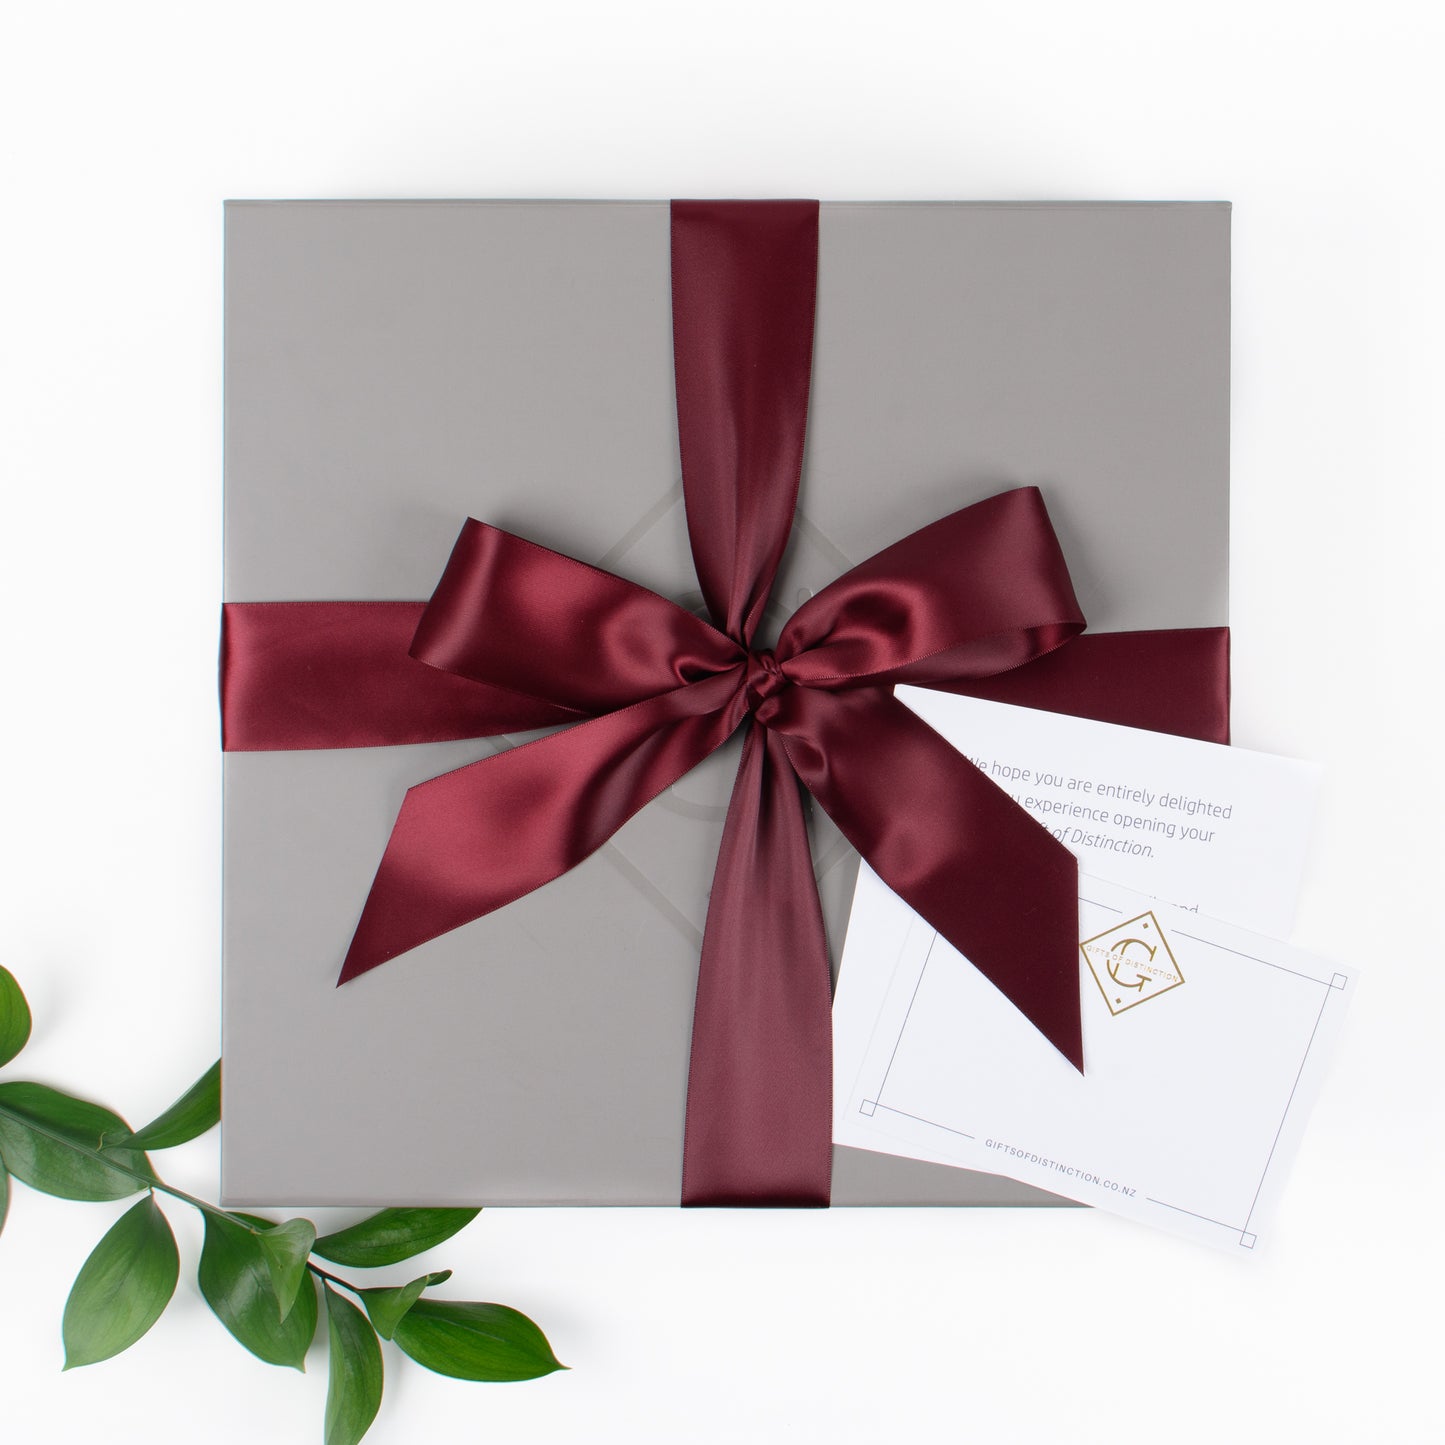 Spoil Her Petite - Gift Boxes NZ - Gifts of Distinction